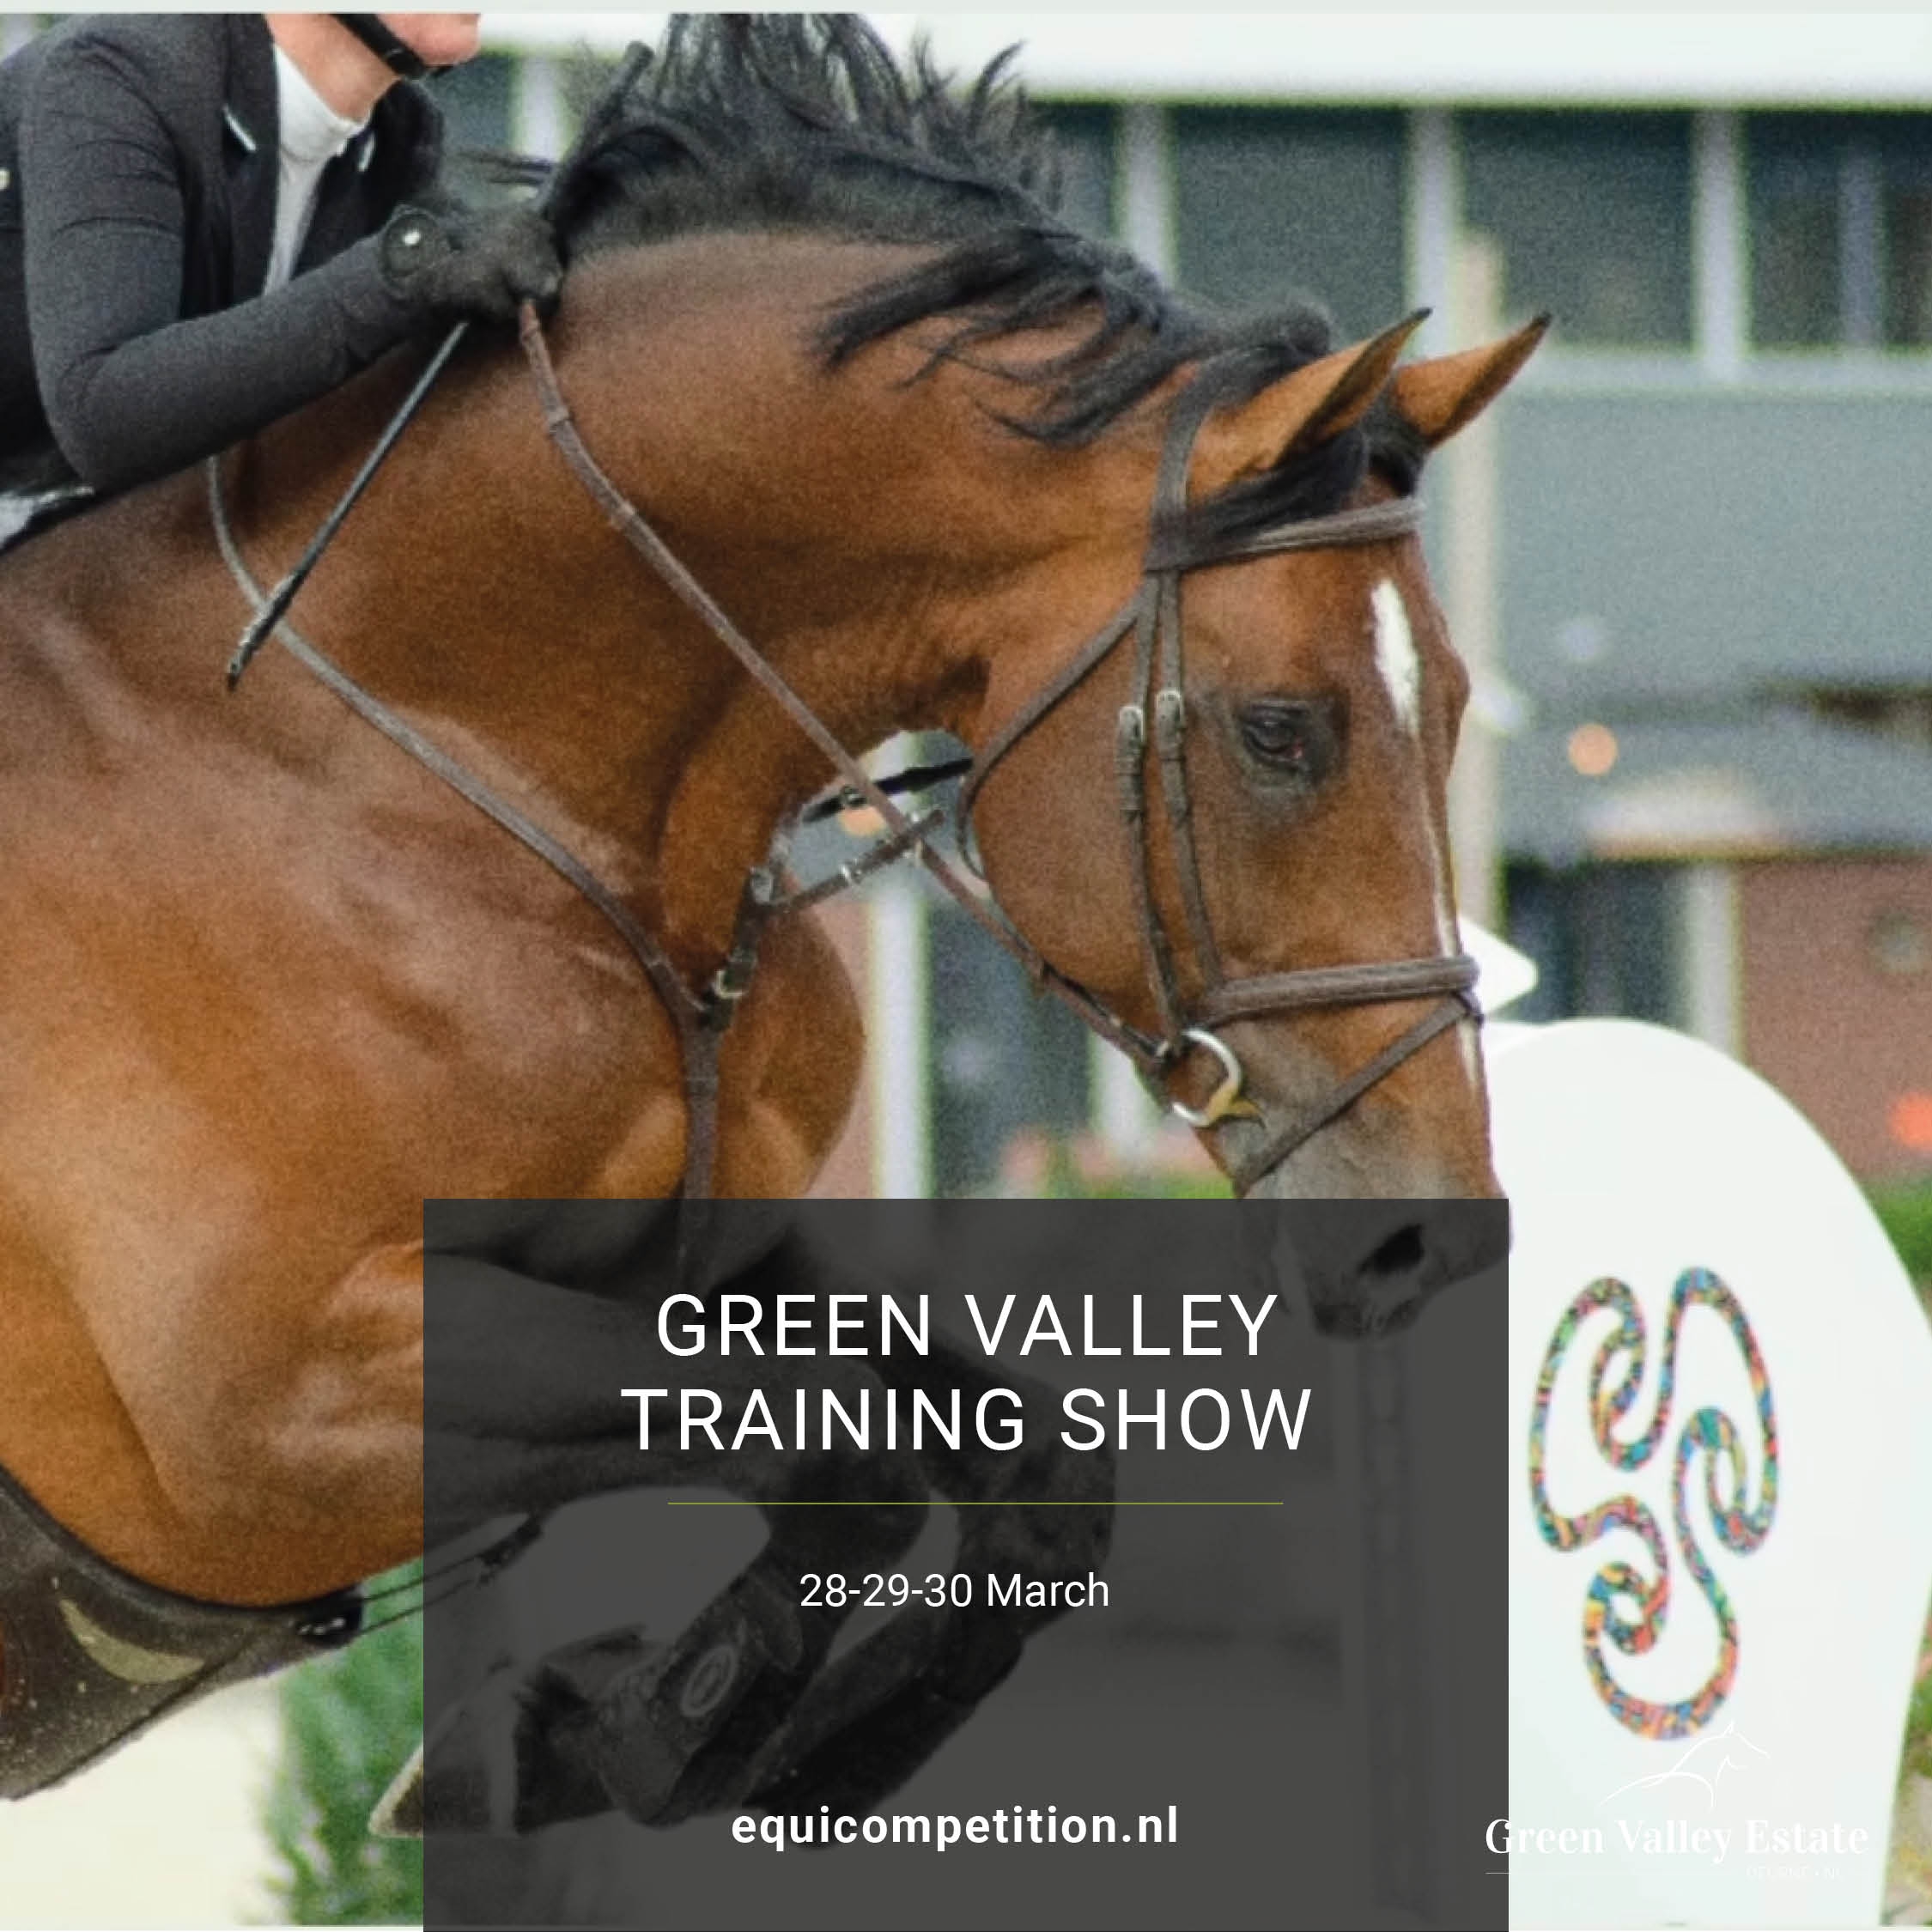 GREEN VALLEY TRAINING SHOW